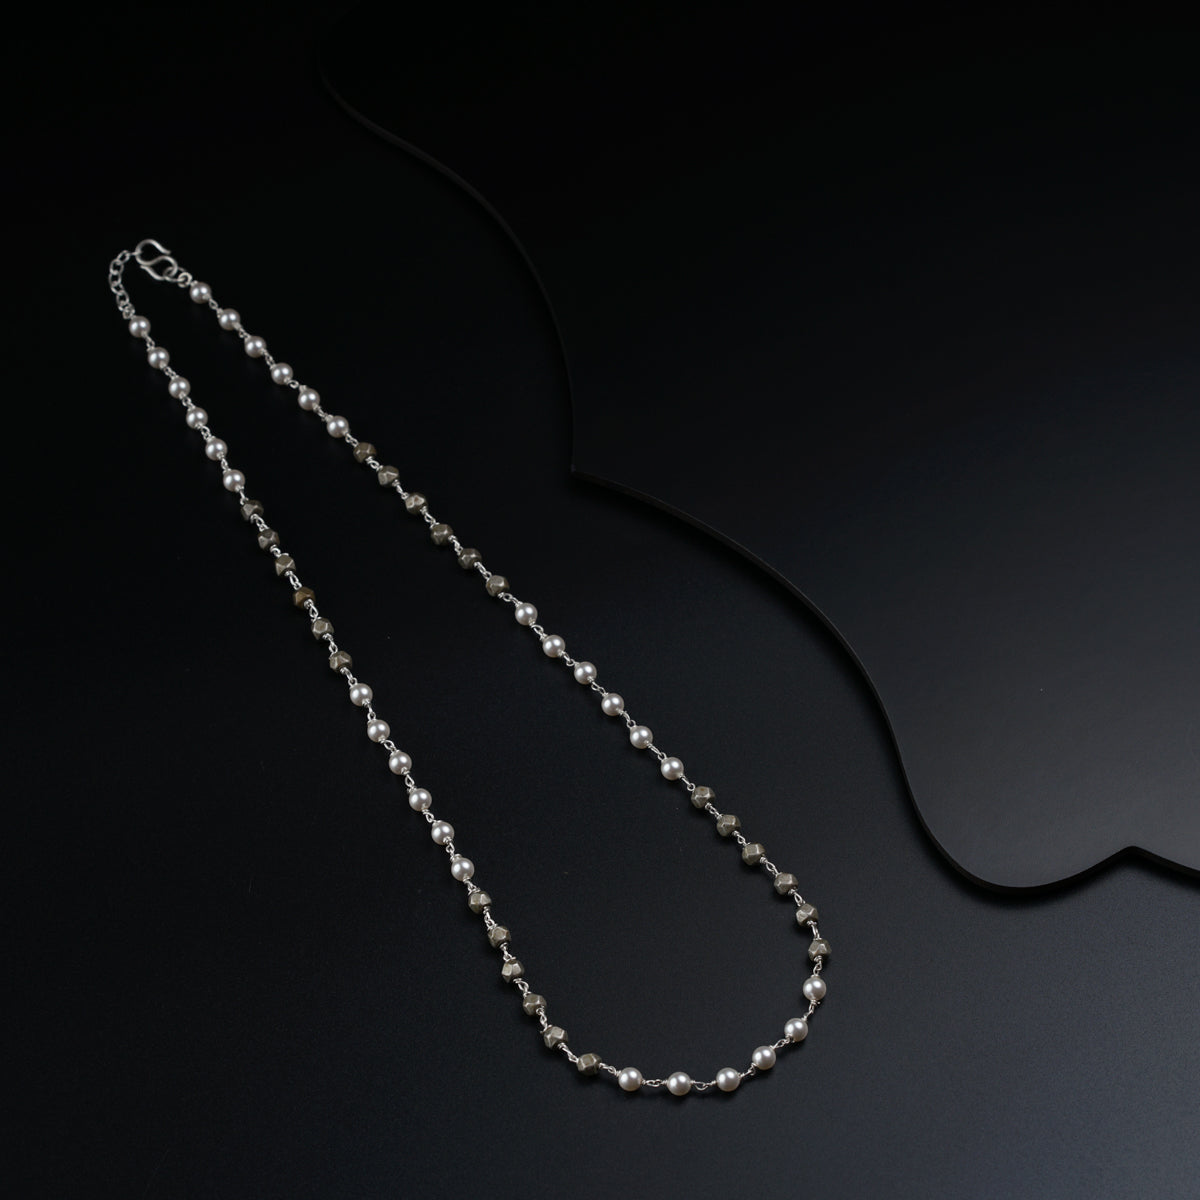 Silver Chain With Pearls and Pyrite stones